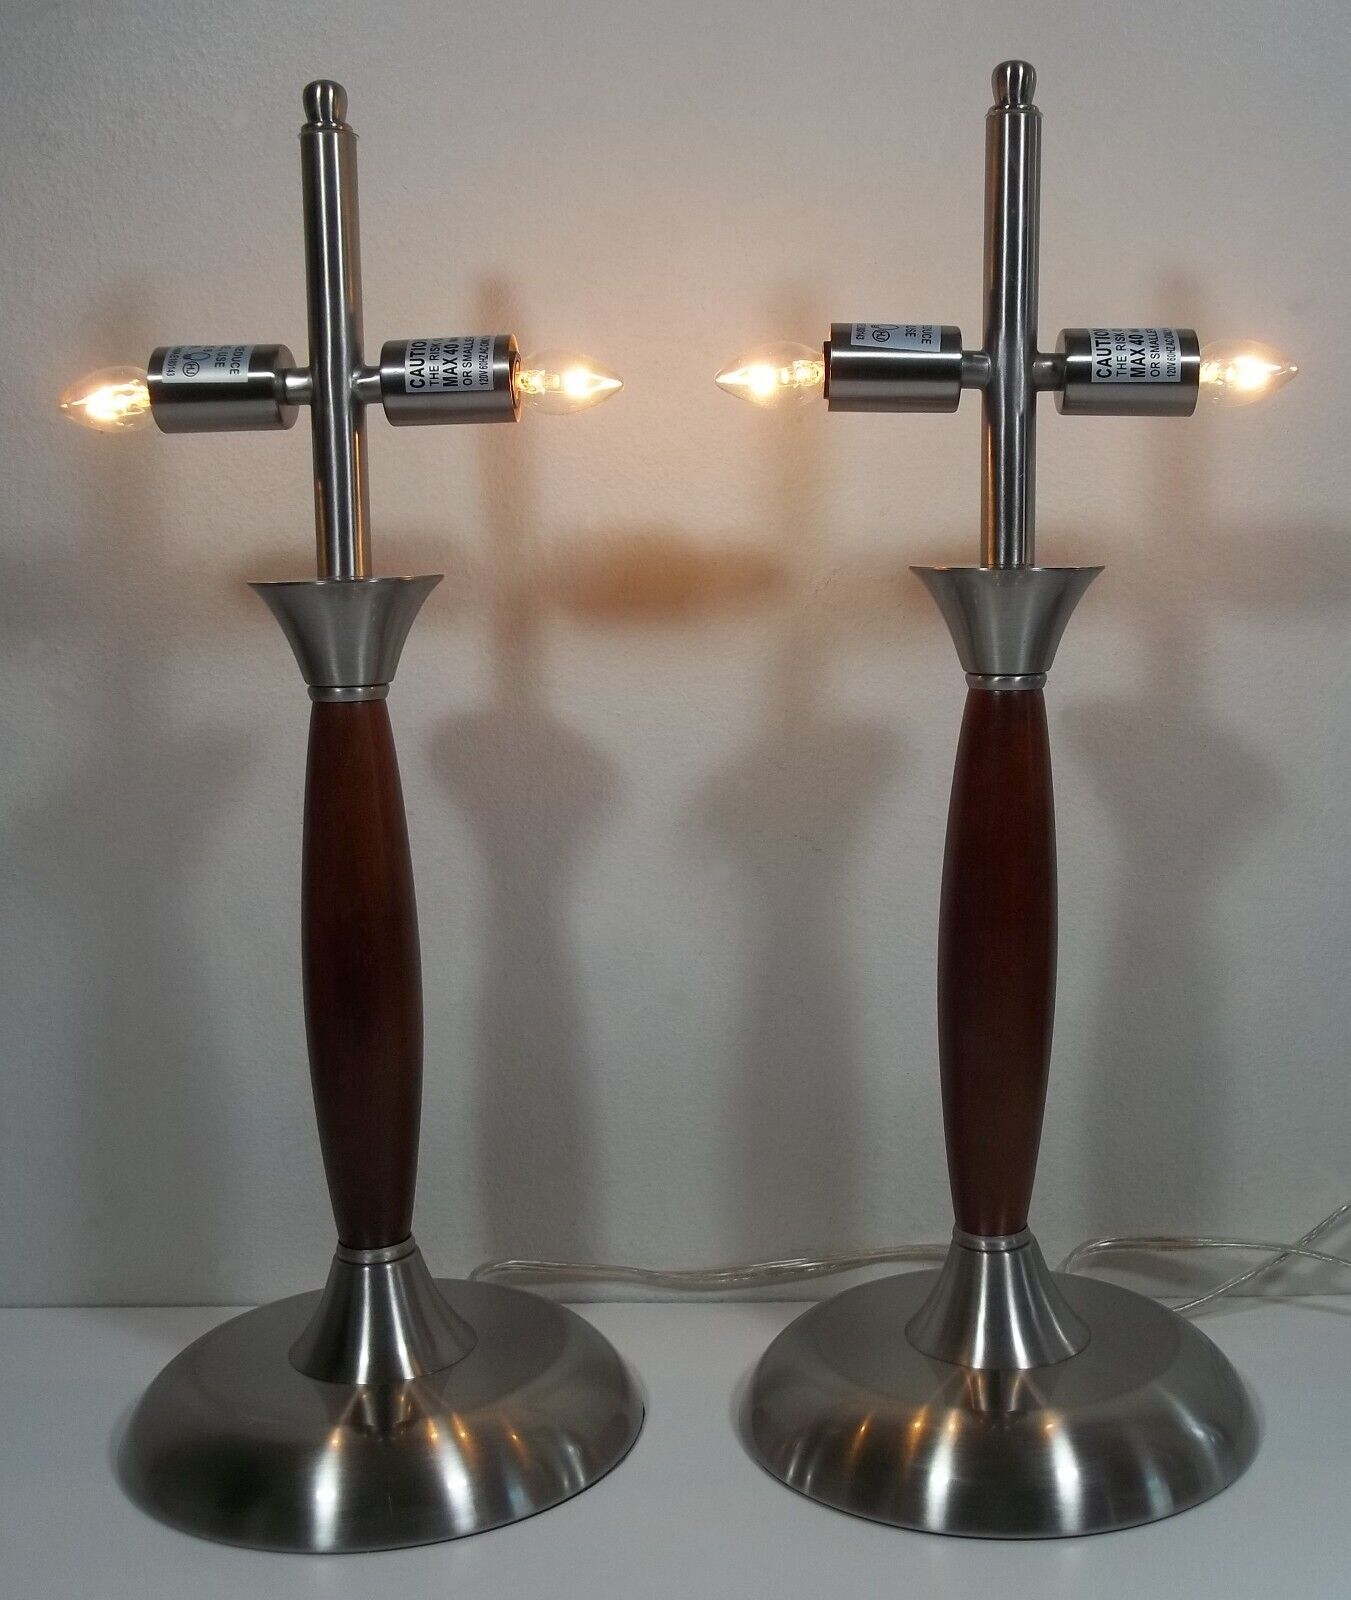 Lot of 2 Mid Century Natural Wood and Stainless Steel Touch Control Table Lamps